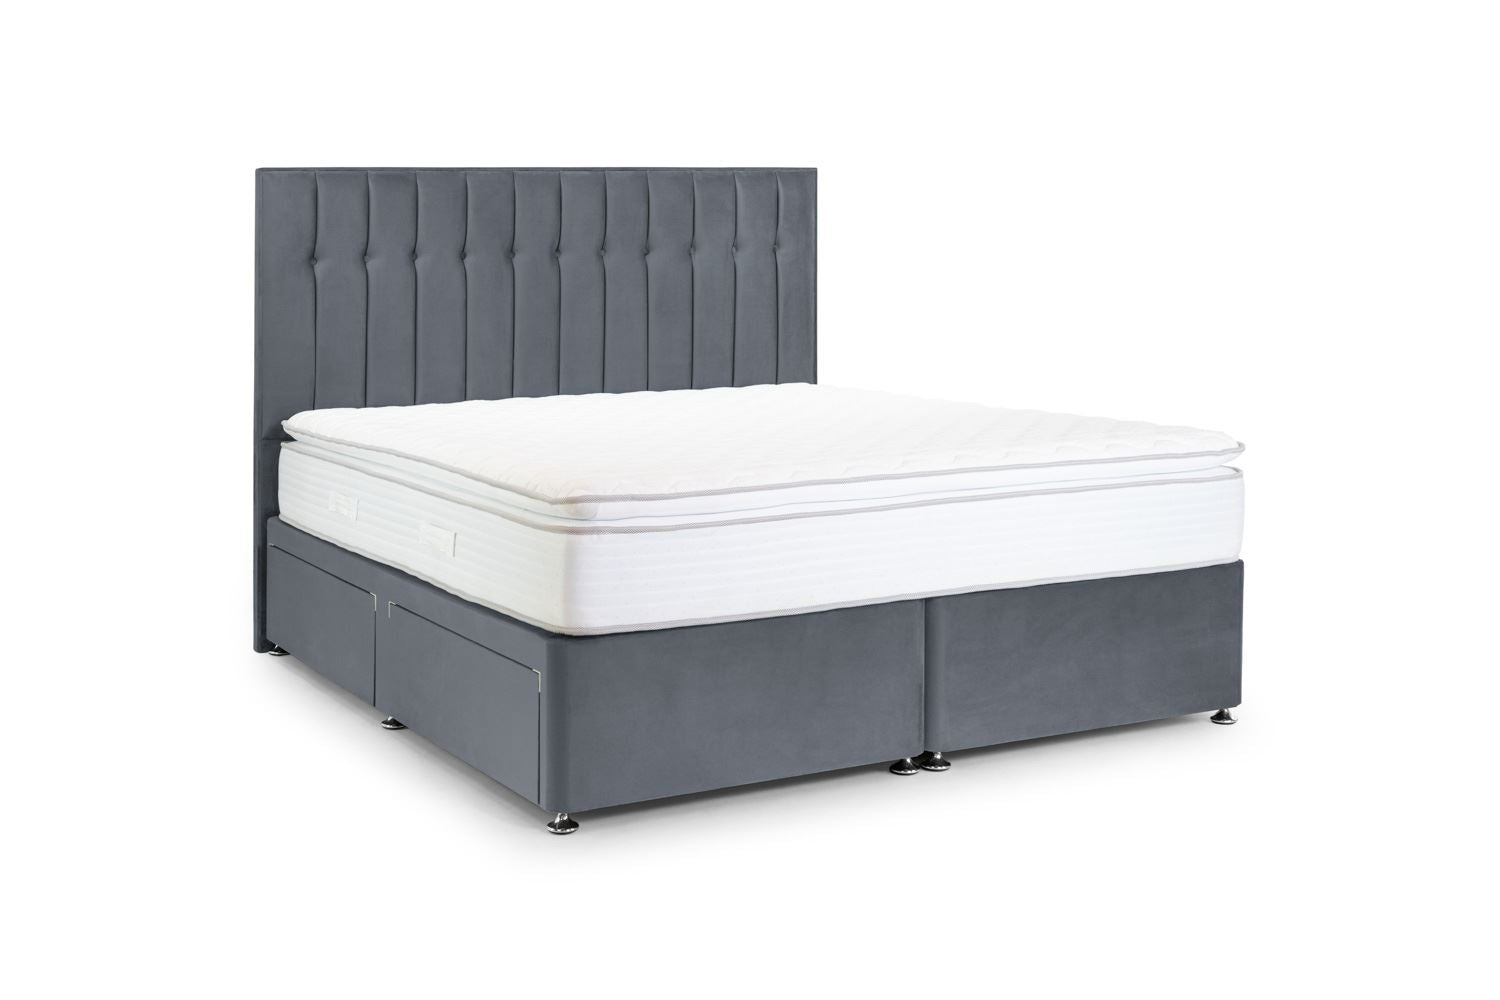 Peri 4 Drawer Bed Double Plush Steel 4 Drawers